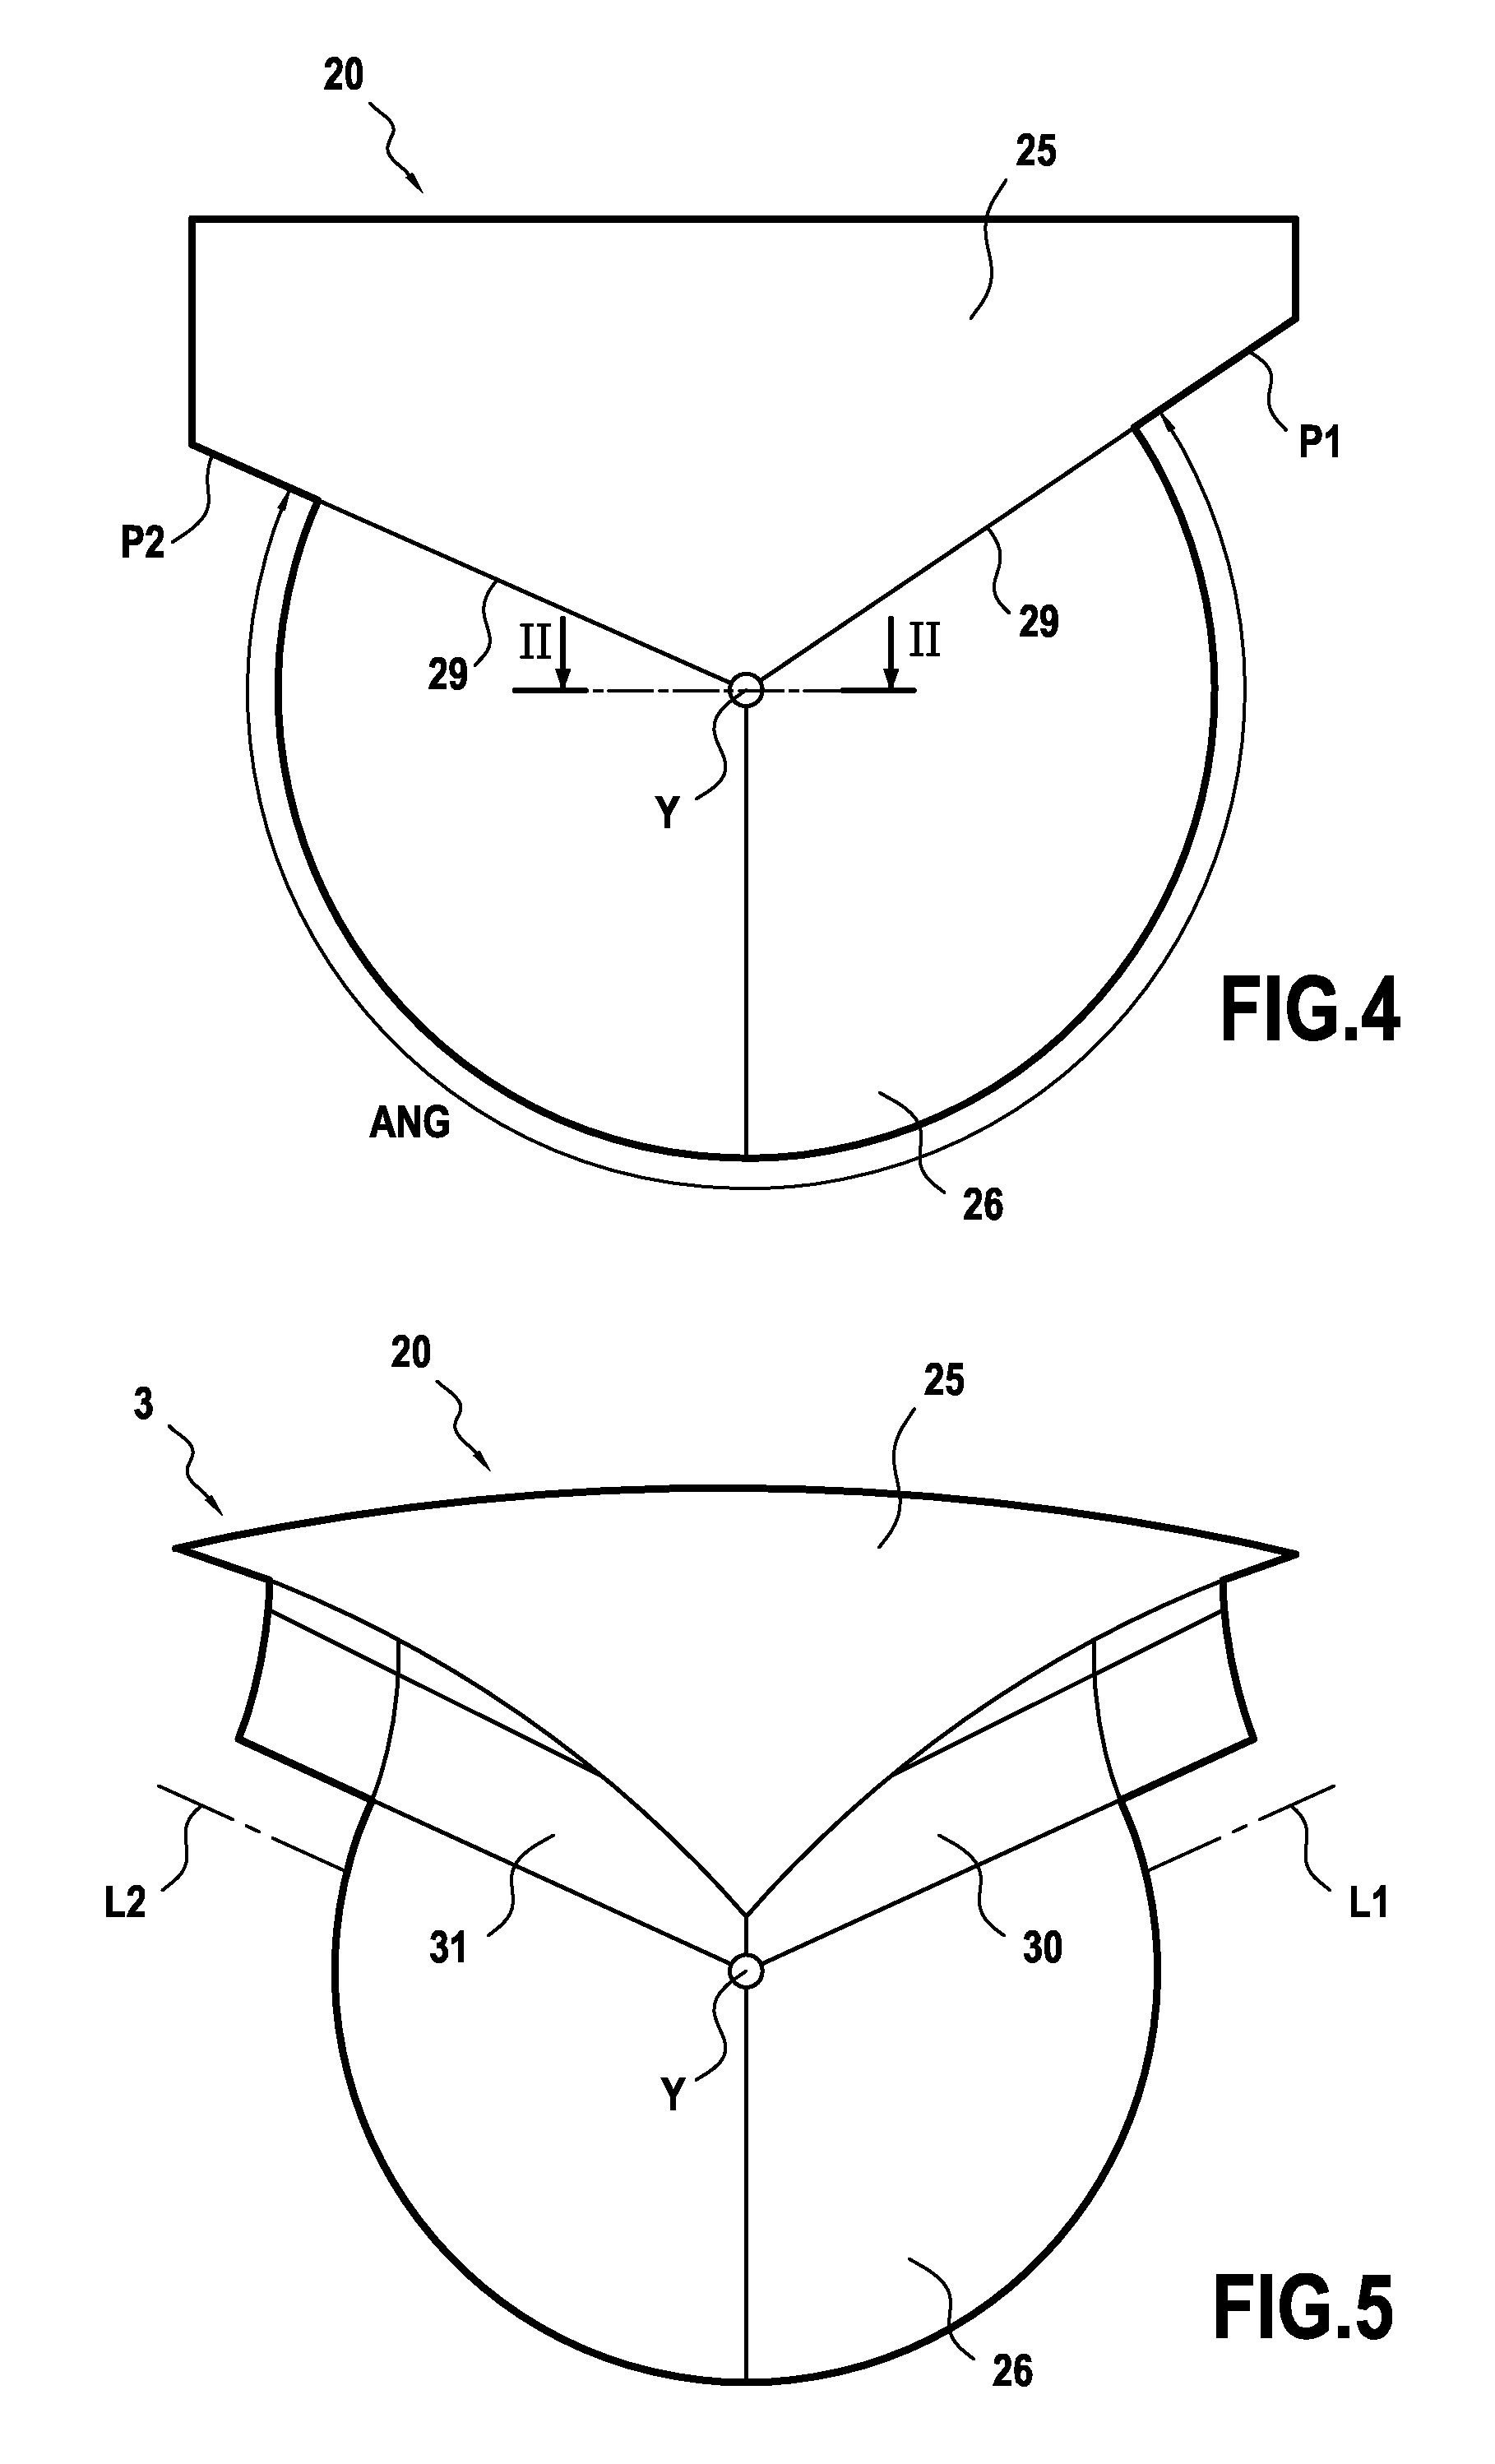 Light guide with coupling portion having a plurality of reflective facets